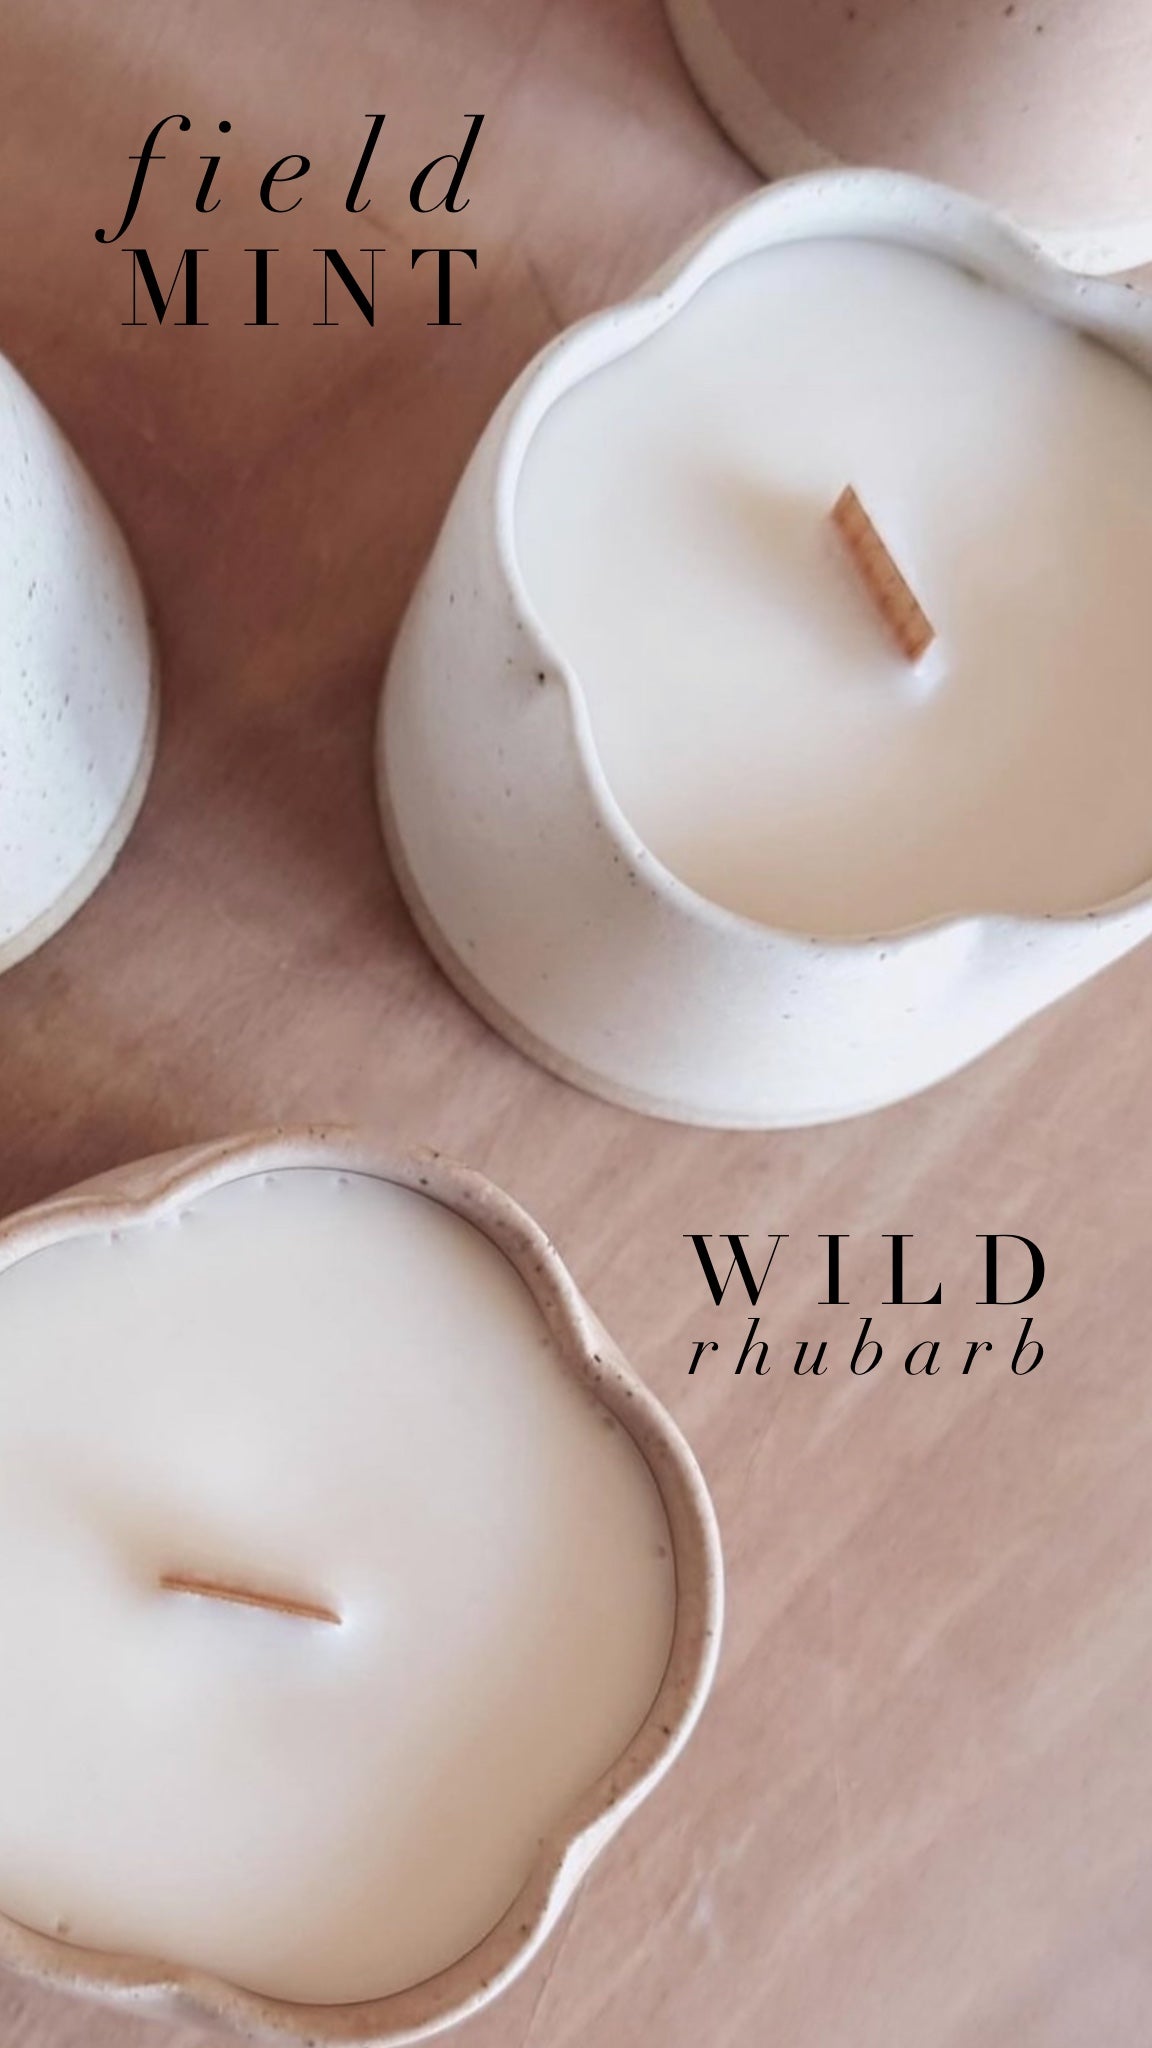 Wild rhubarb / Field mint soy candle pot - PREORDER for end of May delivery